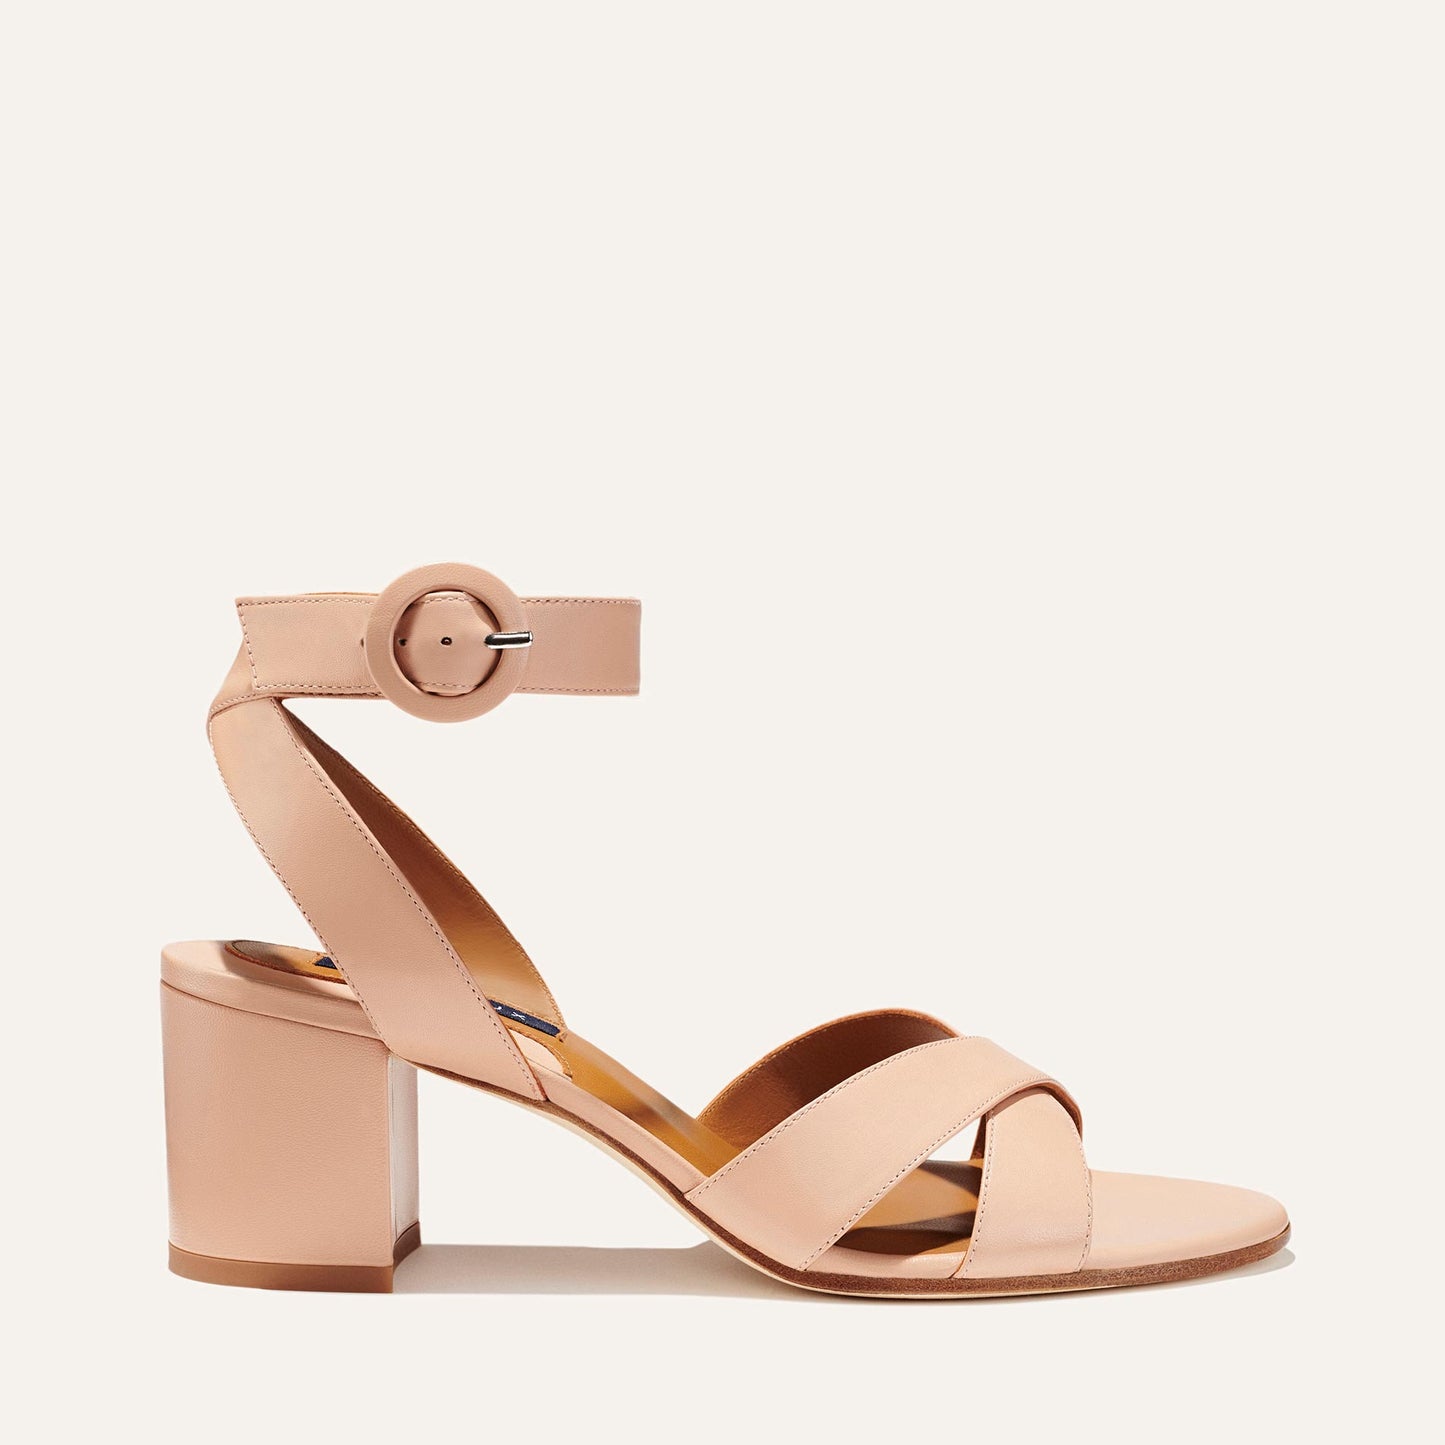 Margaux's classic City Sandal in neutral rose nappa leather with comfortable straps and a walkable block heel